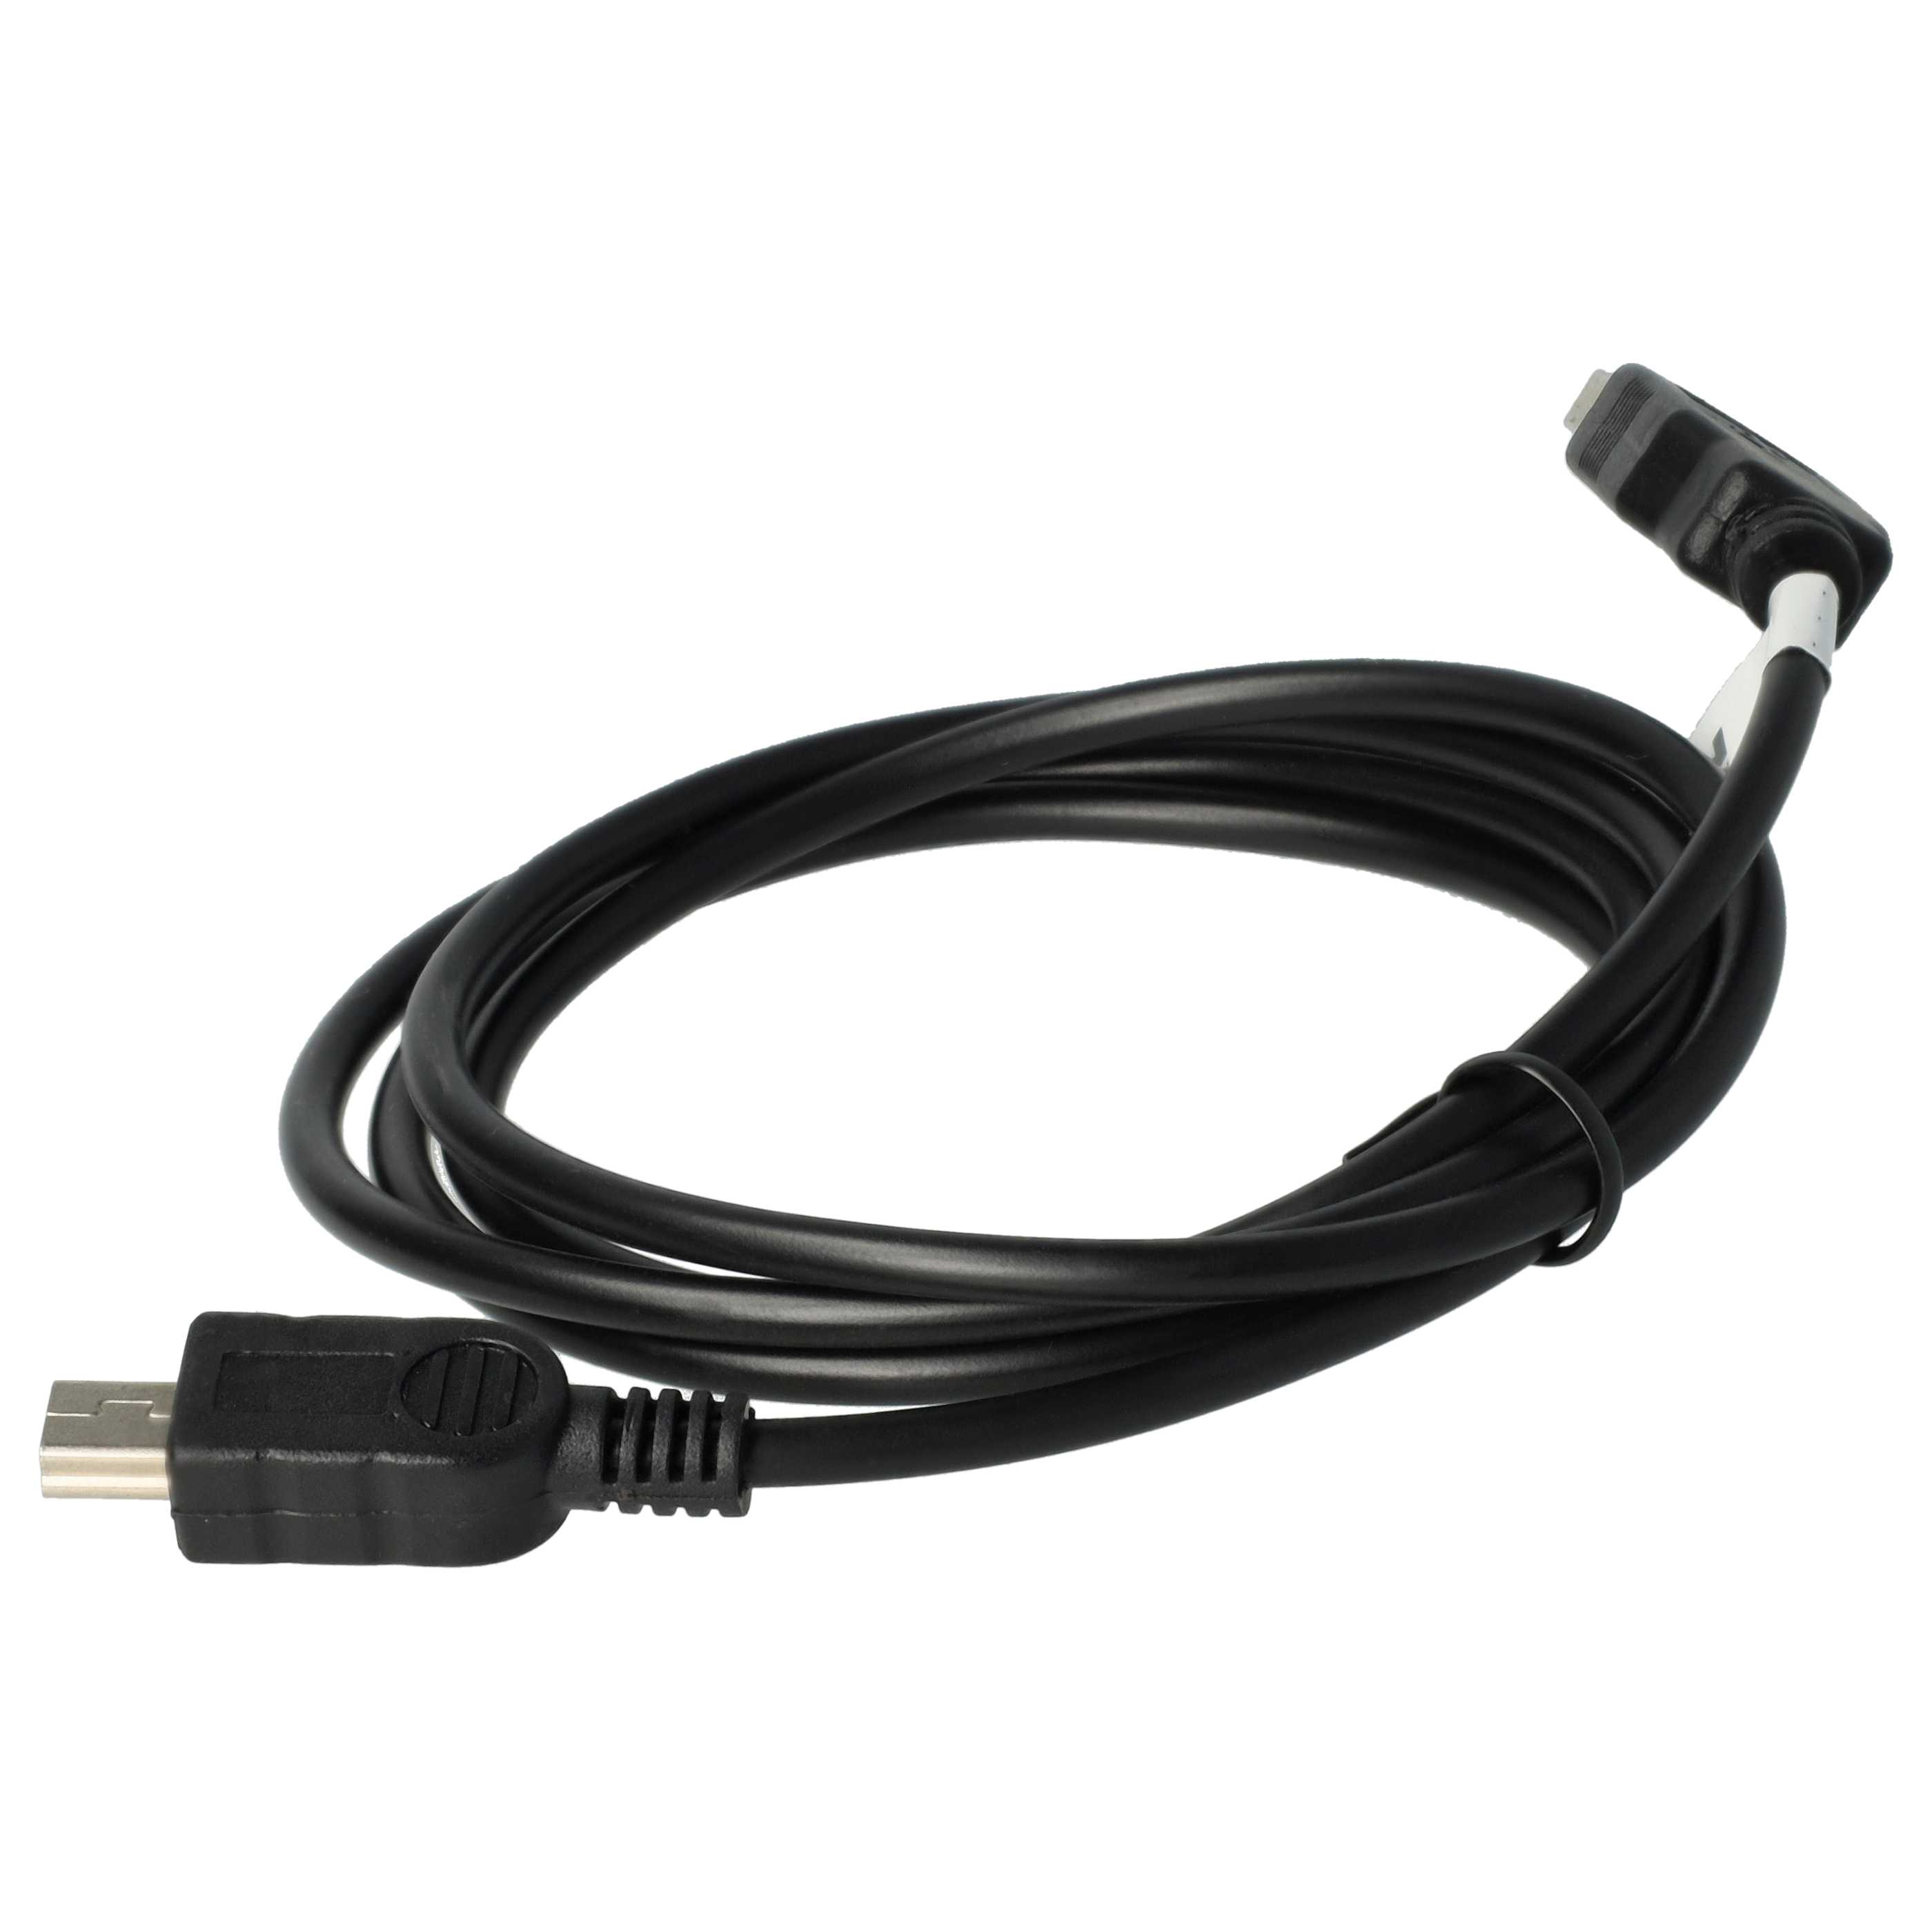 USB Data Cable suitable for Belkin Camera etc. - 100 cm